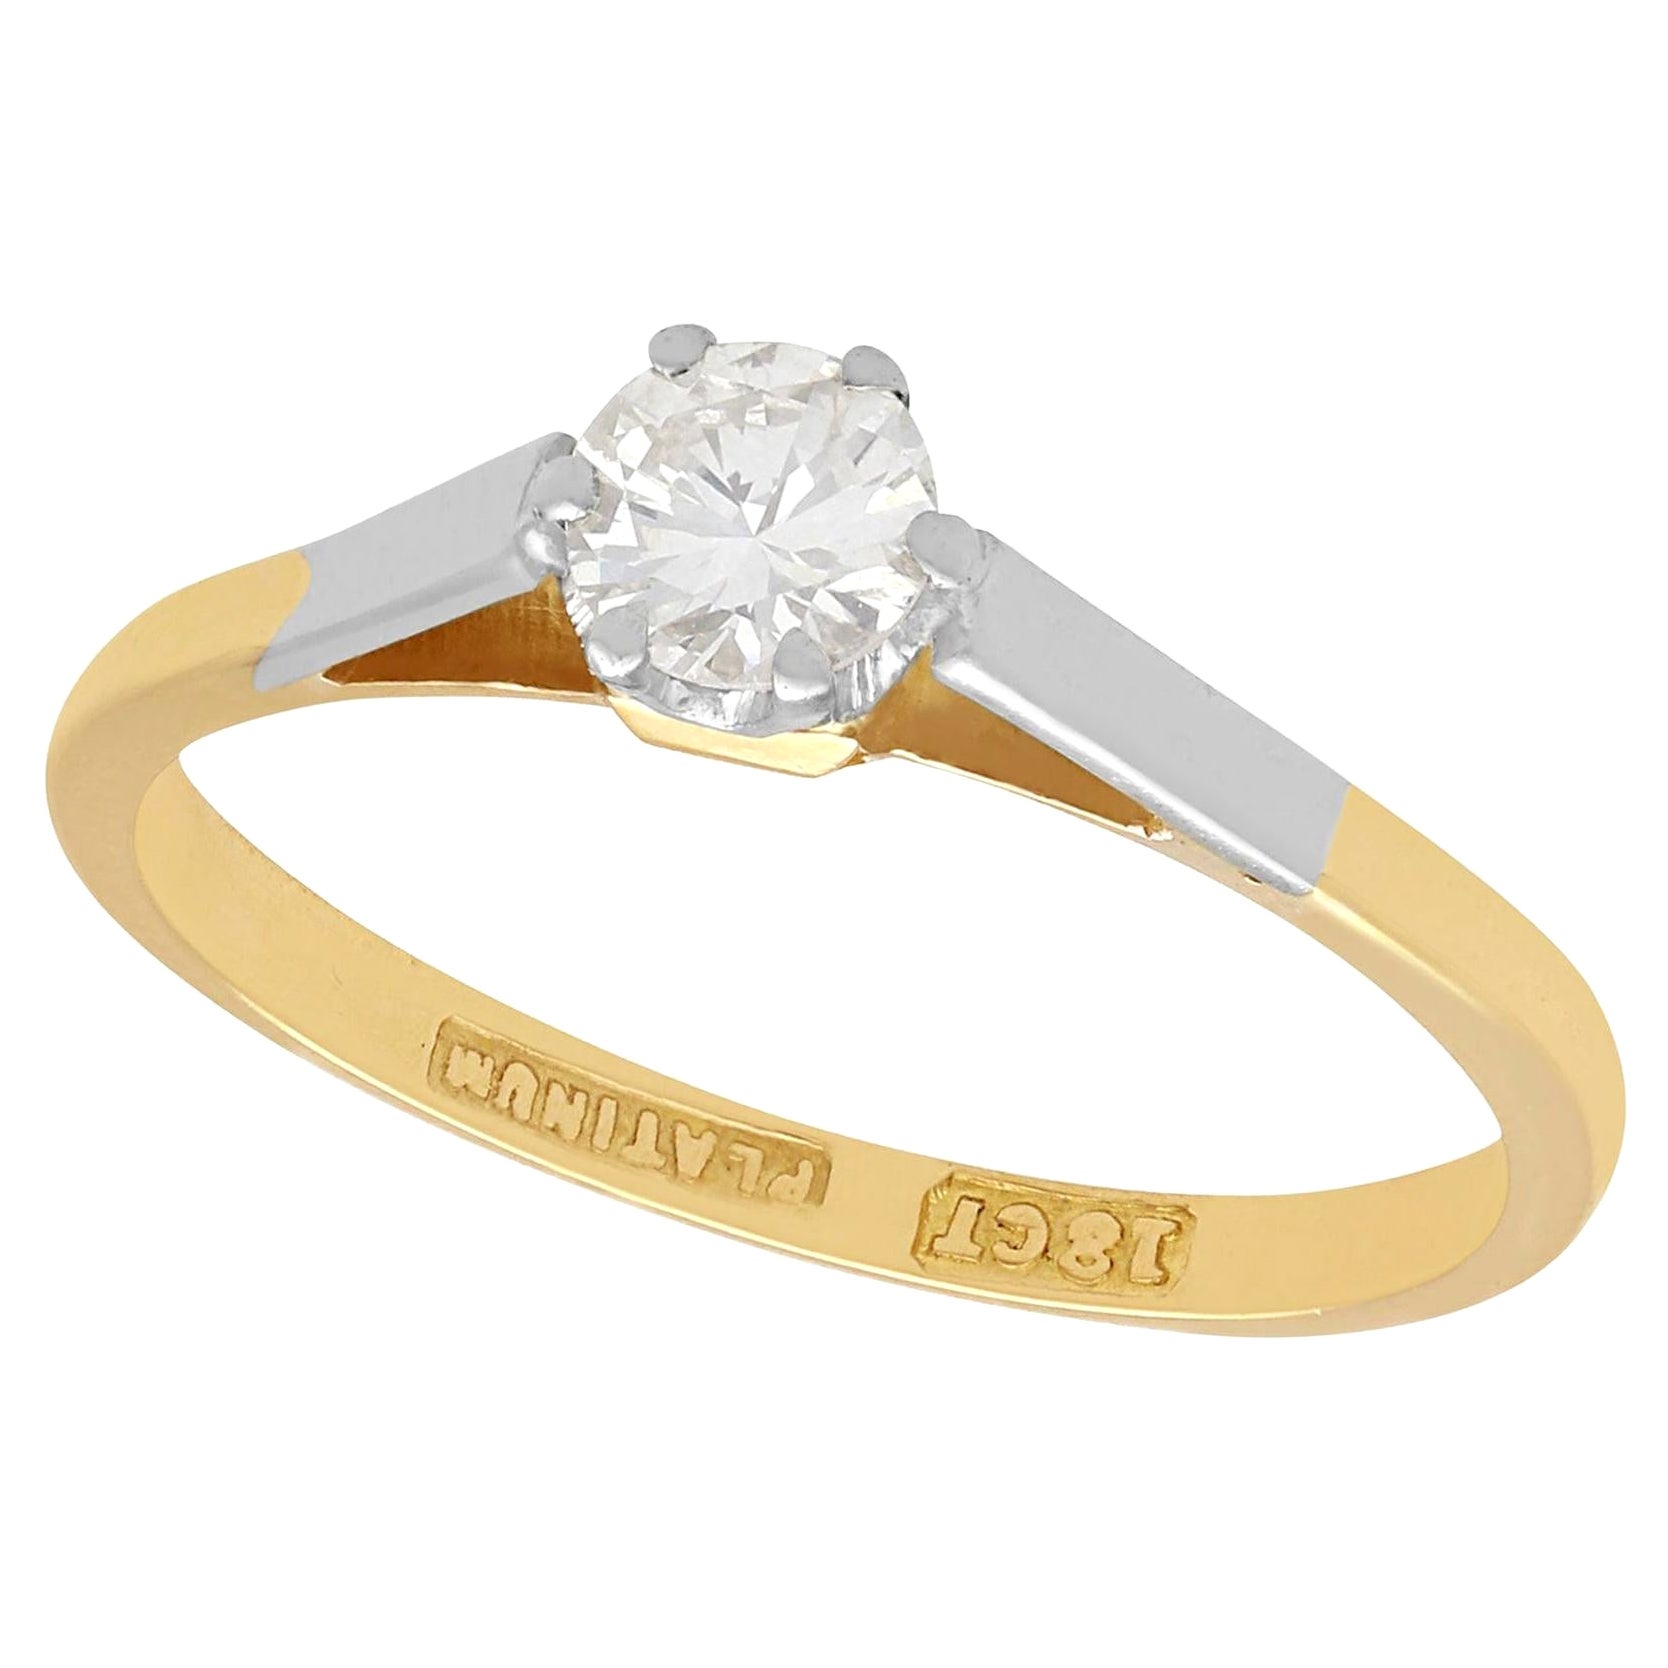 Vintage Diamond and Yellow Gold Solitaire Engagement Ring, Circa 1950